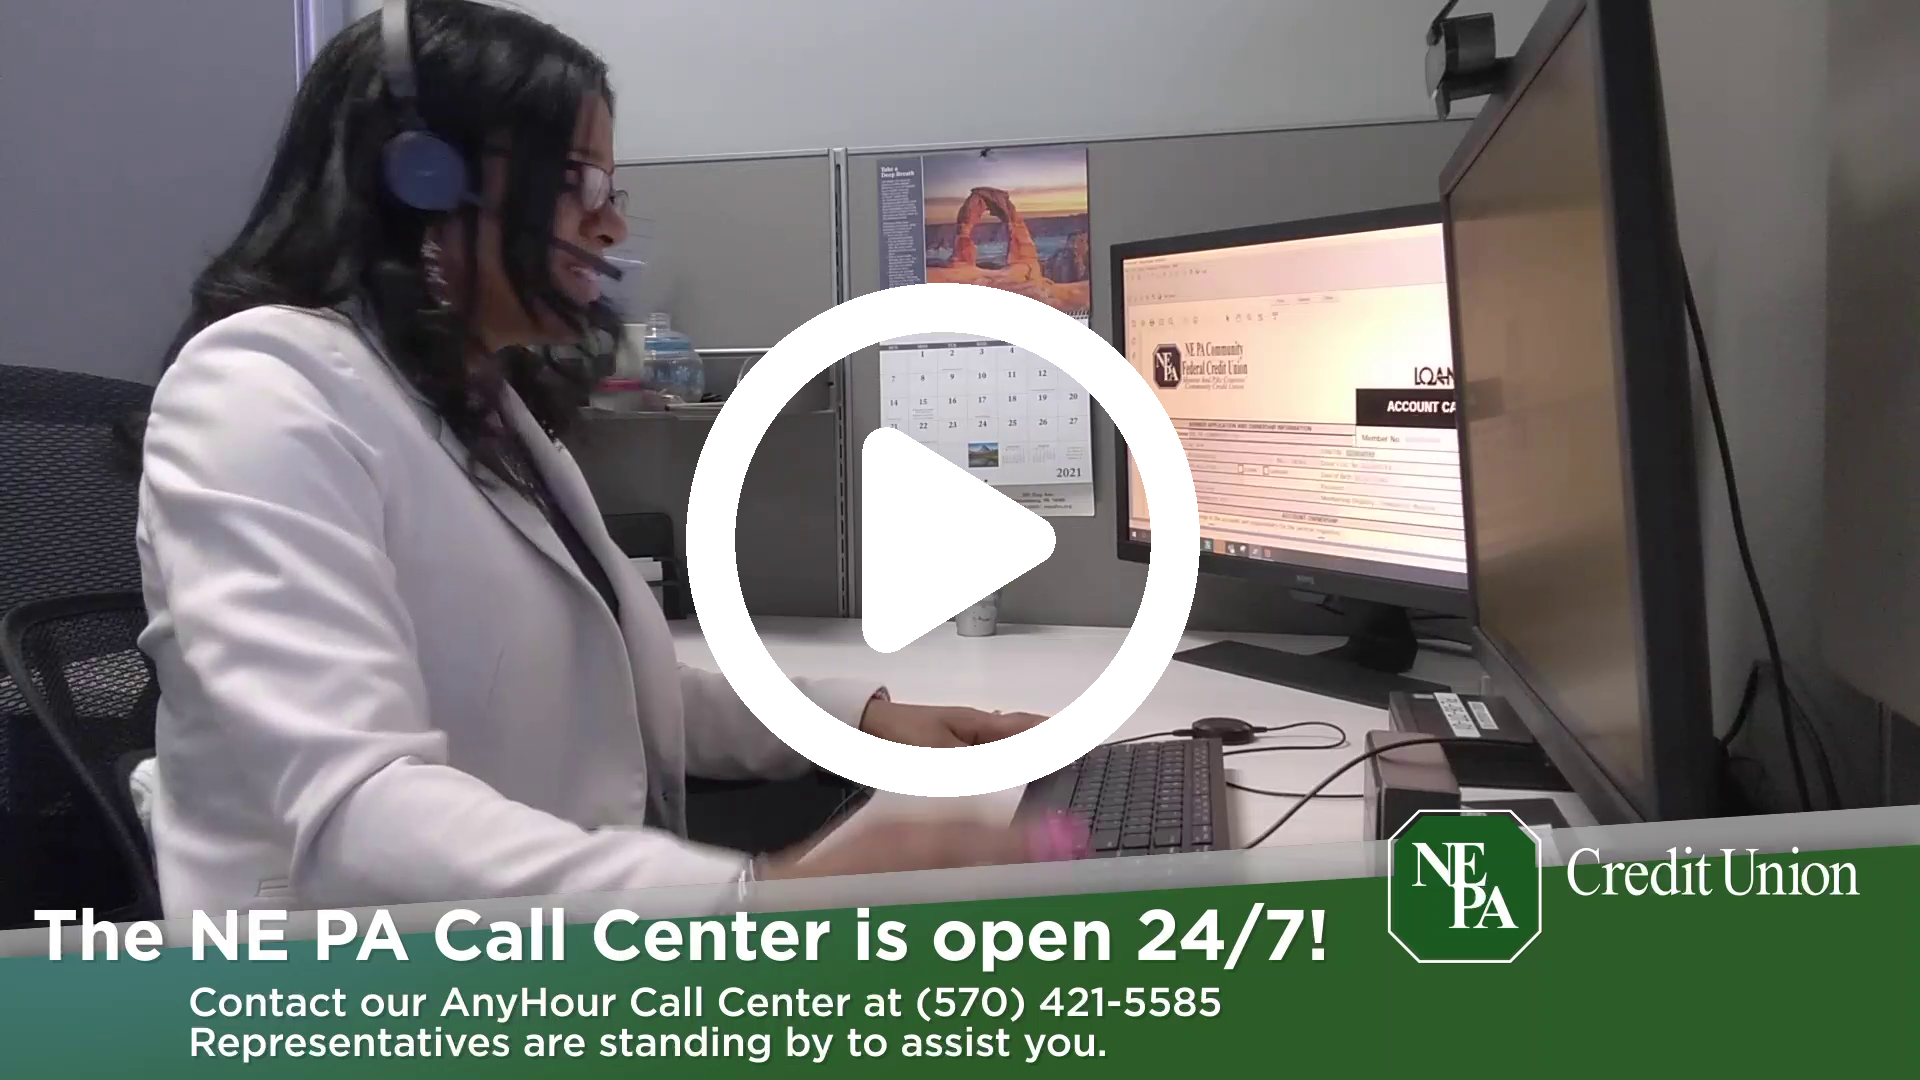 any hour call center video